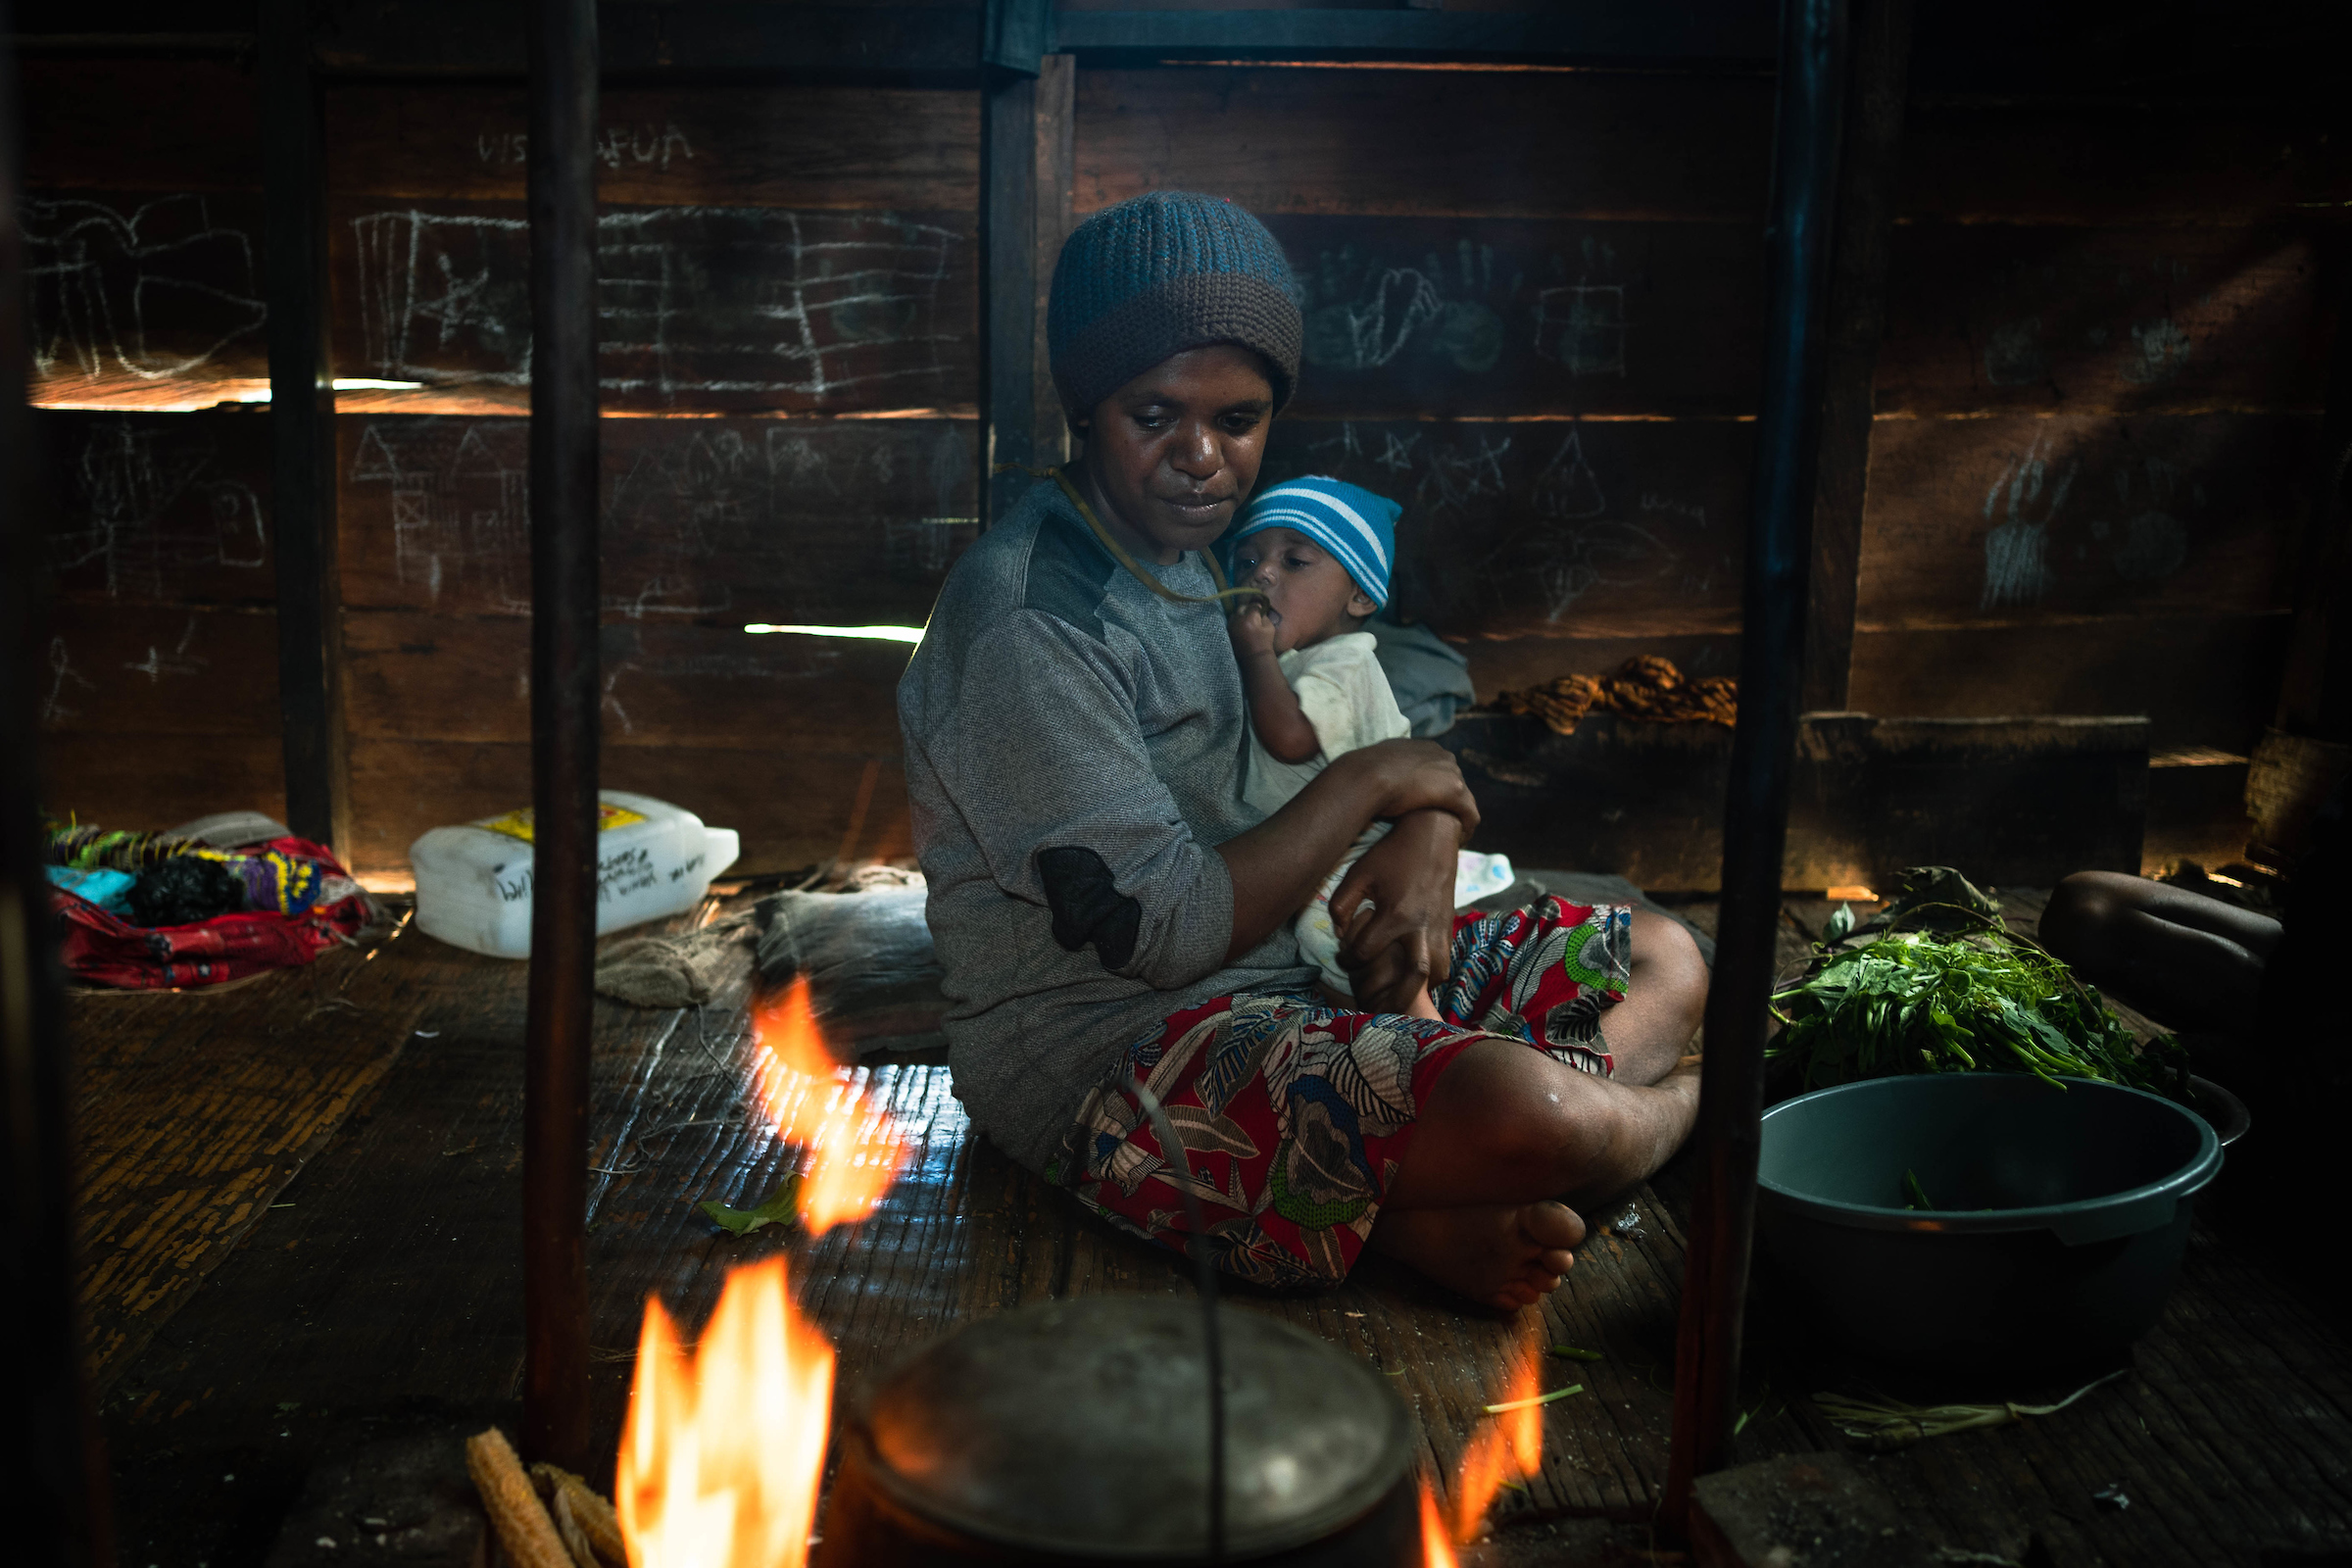 A mother sits cross-legged inside of a dark wooden structure, looking at a pot on a fire. She is holding a young child, who is grasping her necklace and putting it in their mouth. The woman is wearing a dark blue and black knit cap, a long-sleeved gray shirt, and a red skirt patterned with large leaves. The child is wearing a lighter blue knit hat and a white garment. There are chalk drawings on the wooden walls behind them.